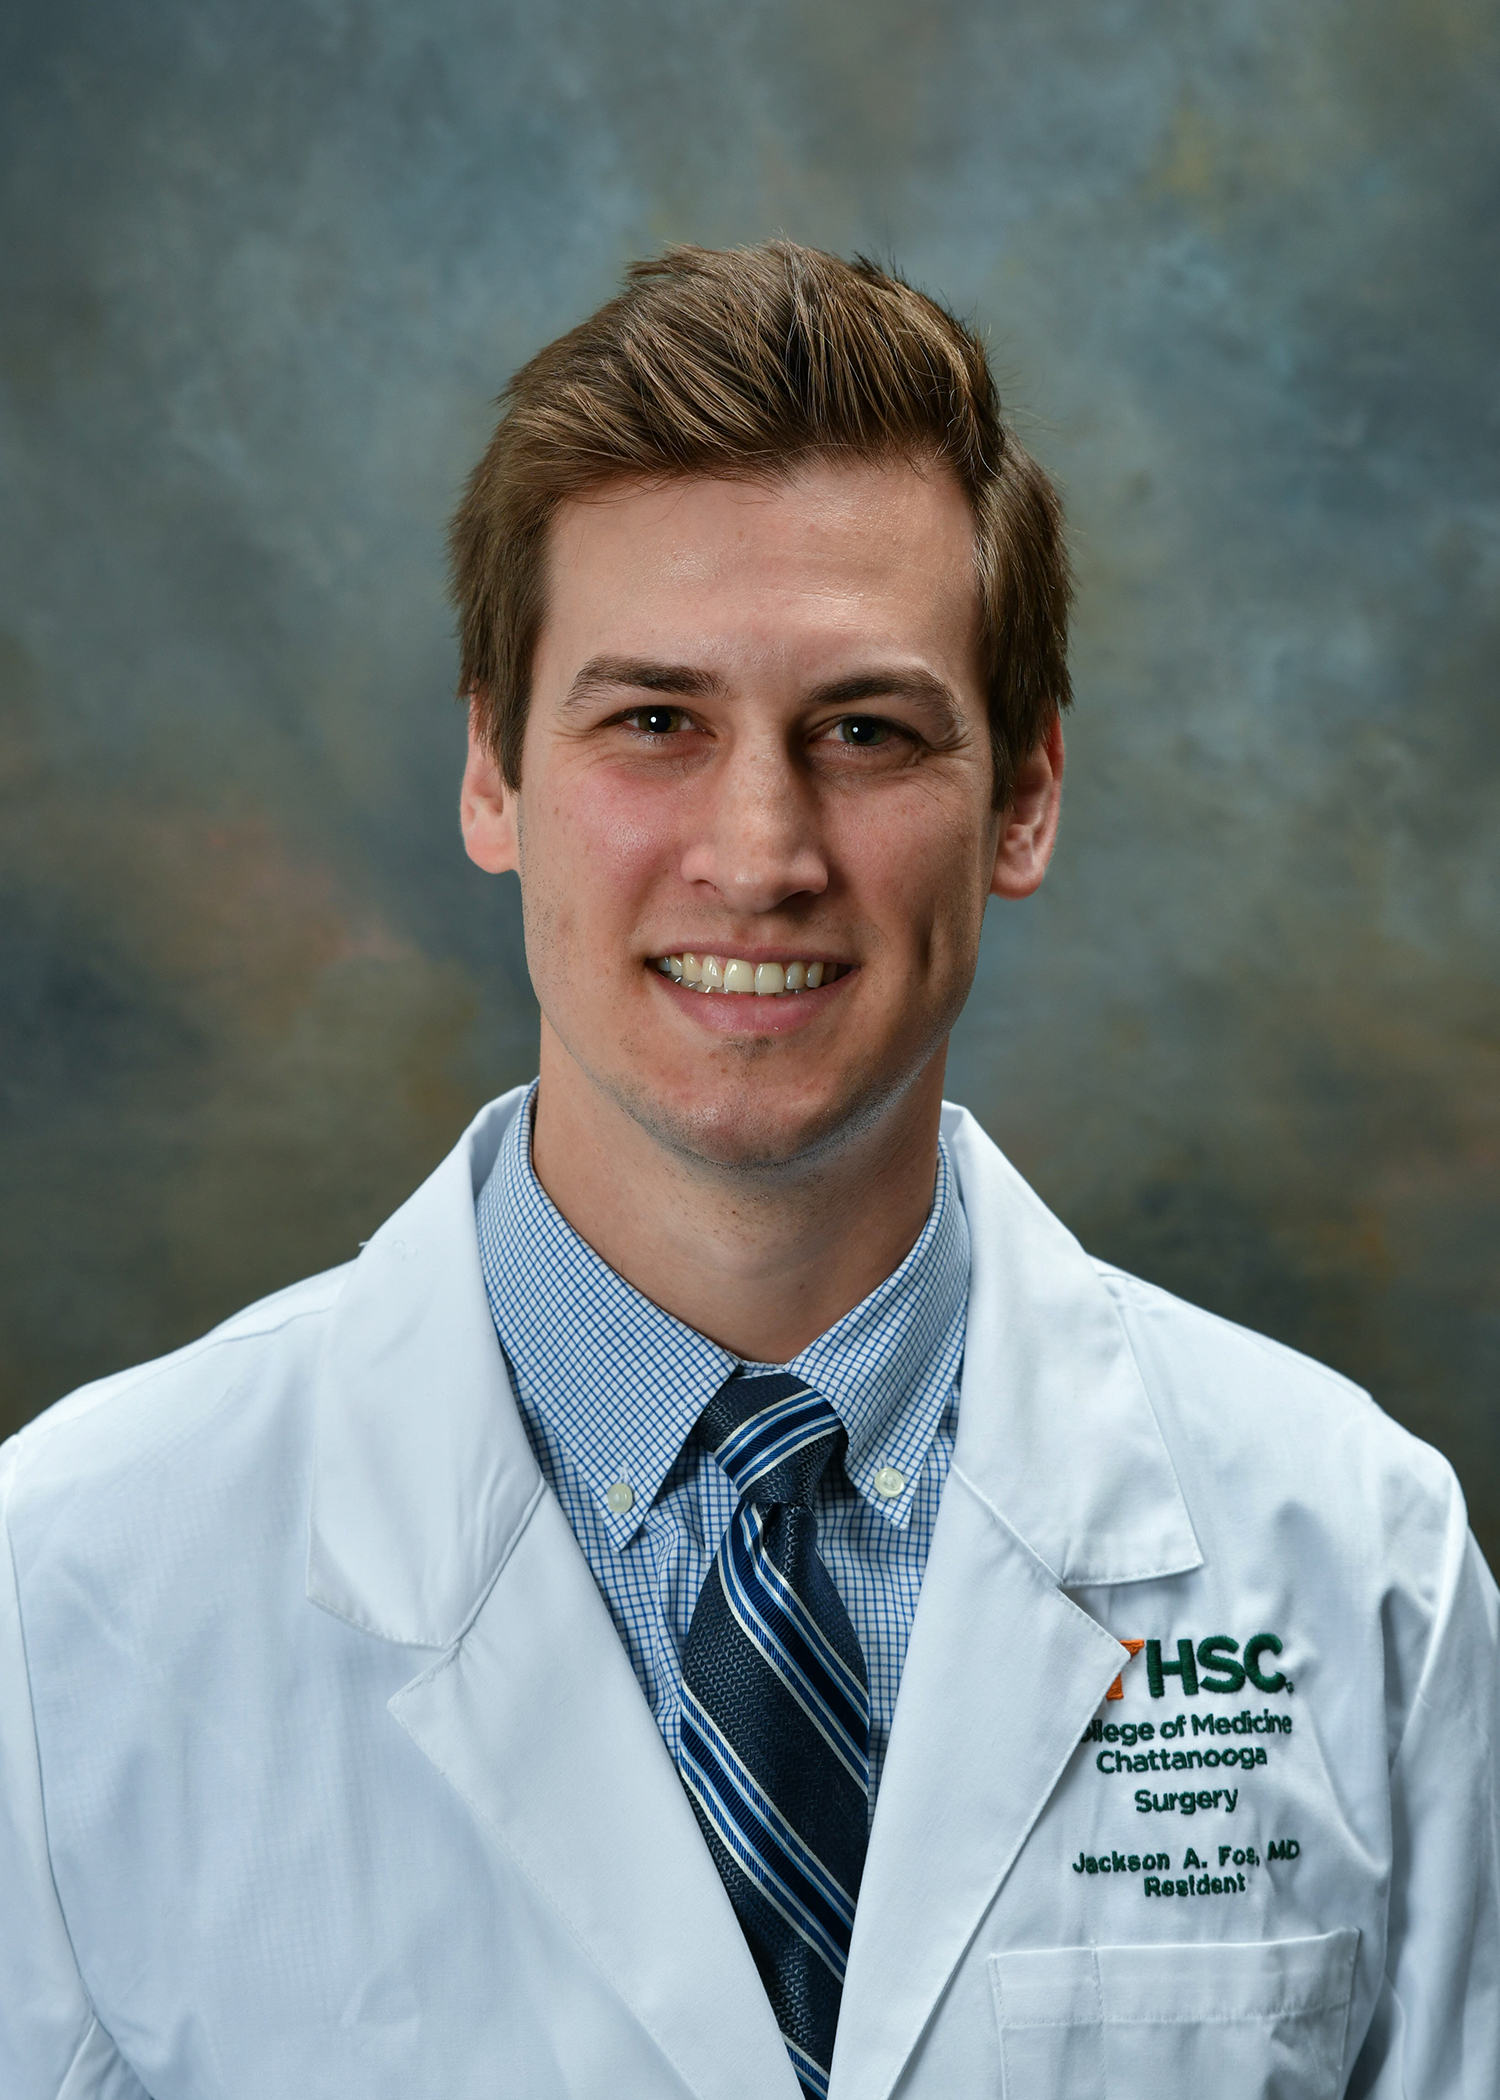 Jackson Fos, MD, Surgery Resident